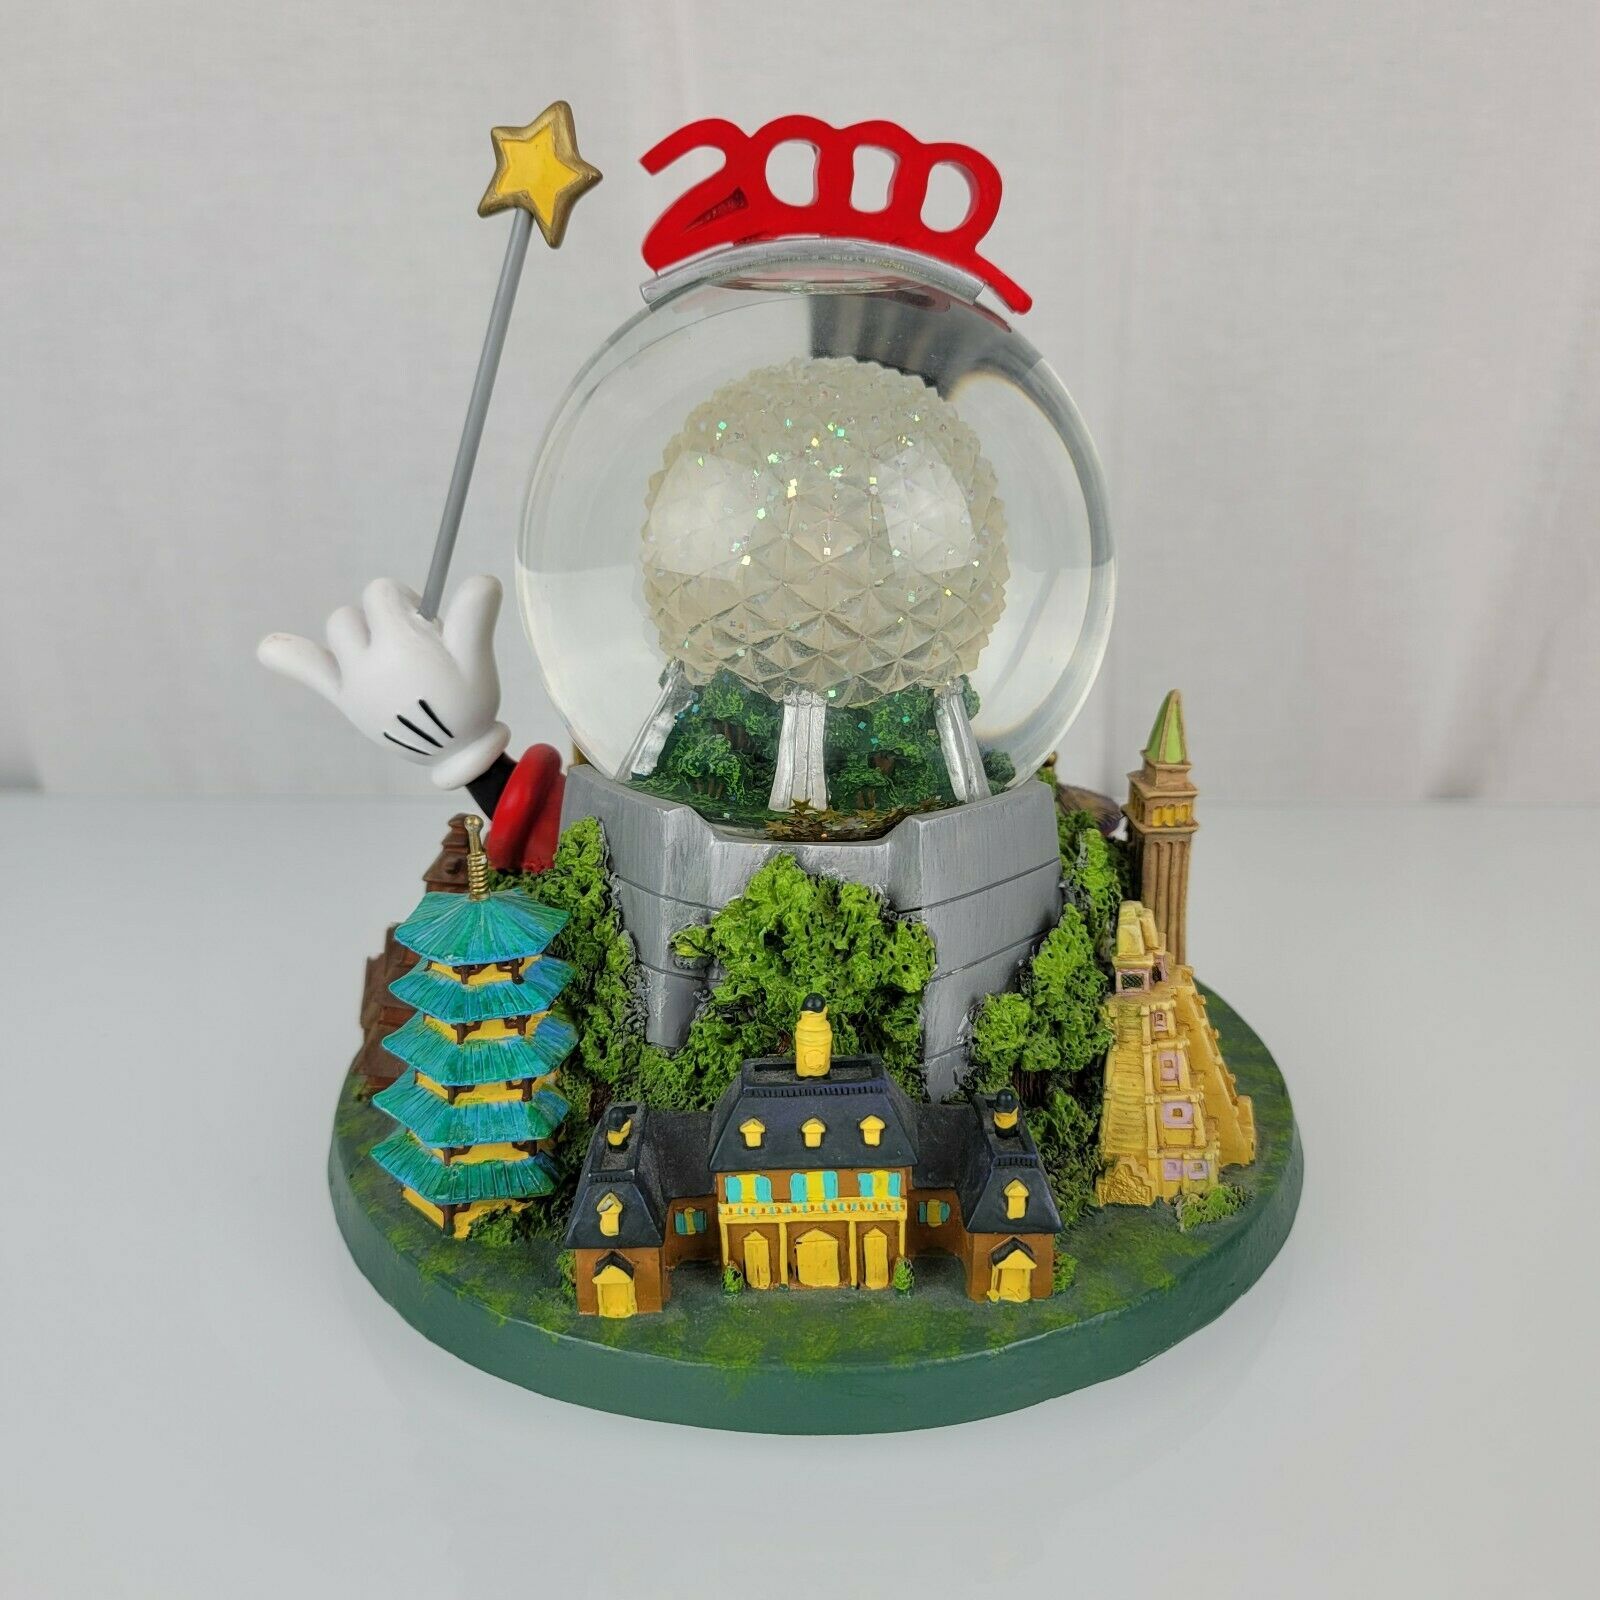 Primary image for Disney Epcot 2000 Snow Water Globe Plays "Celebrate The Future" Light up